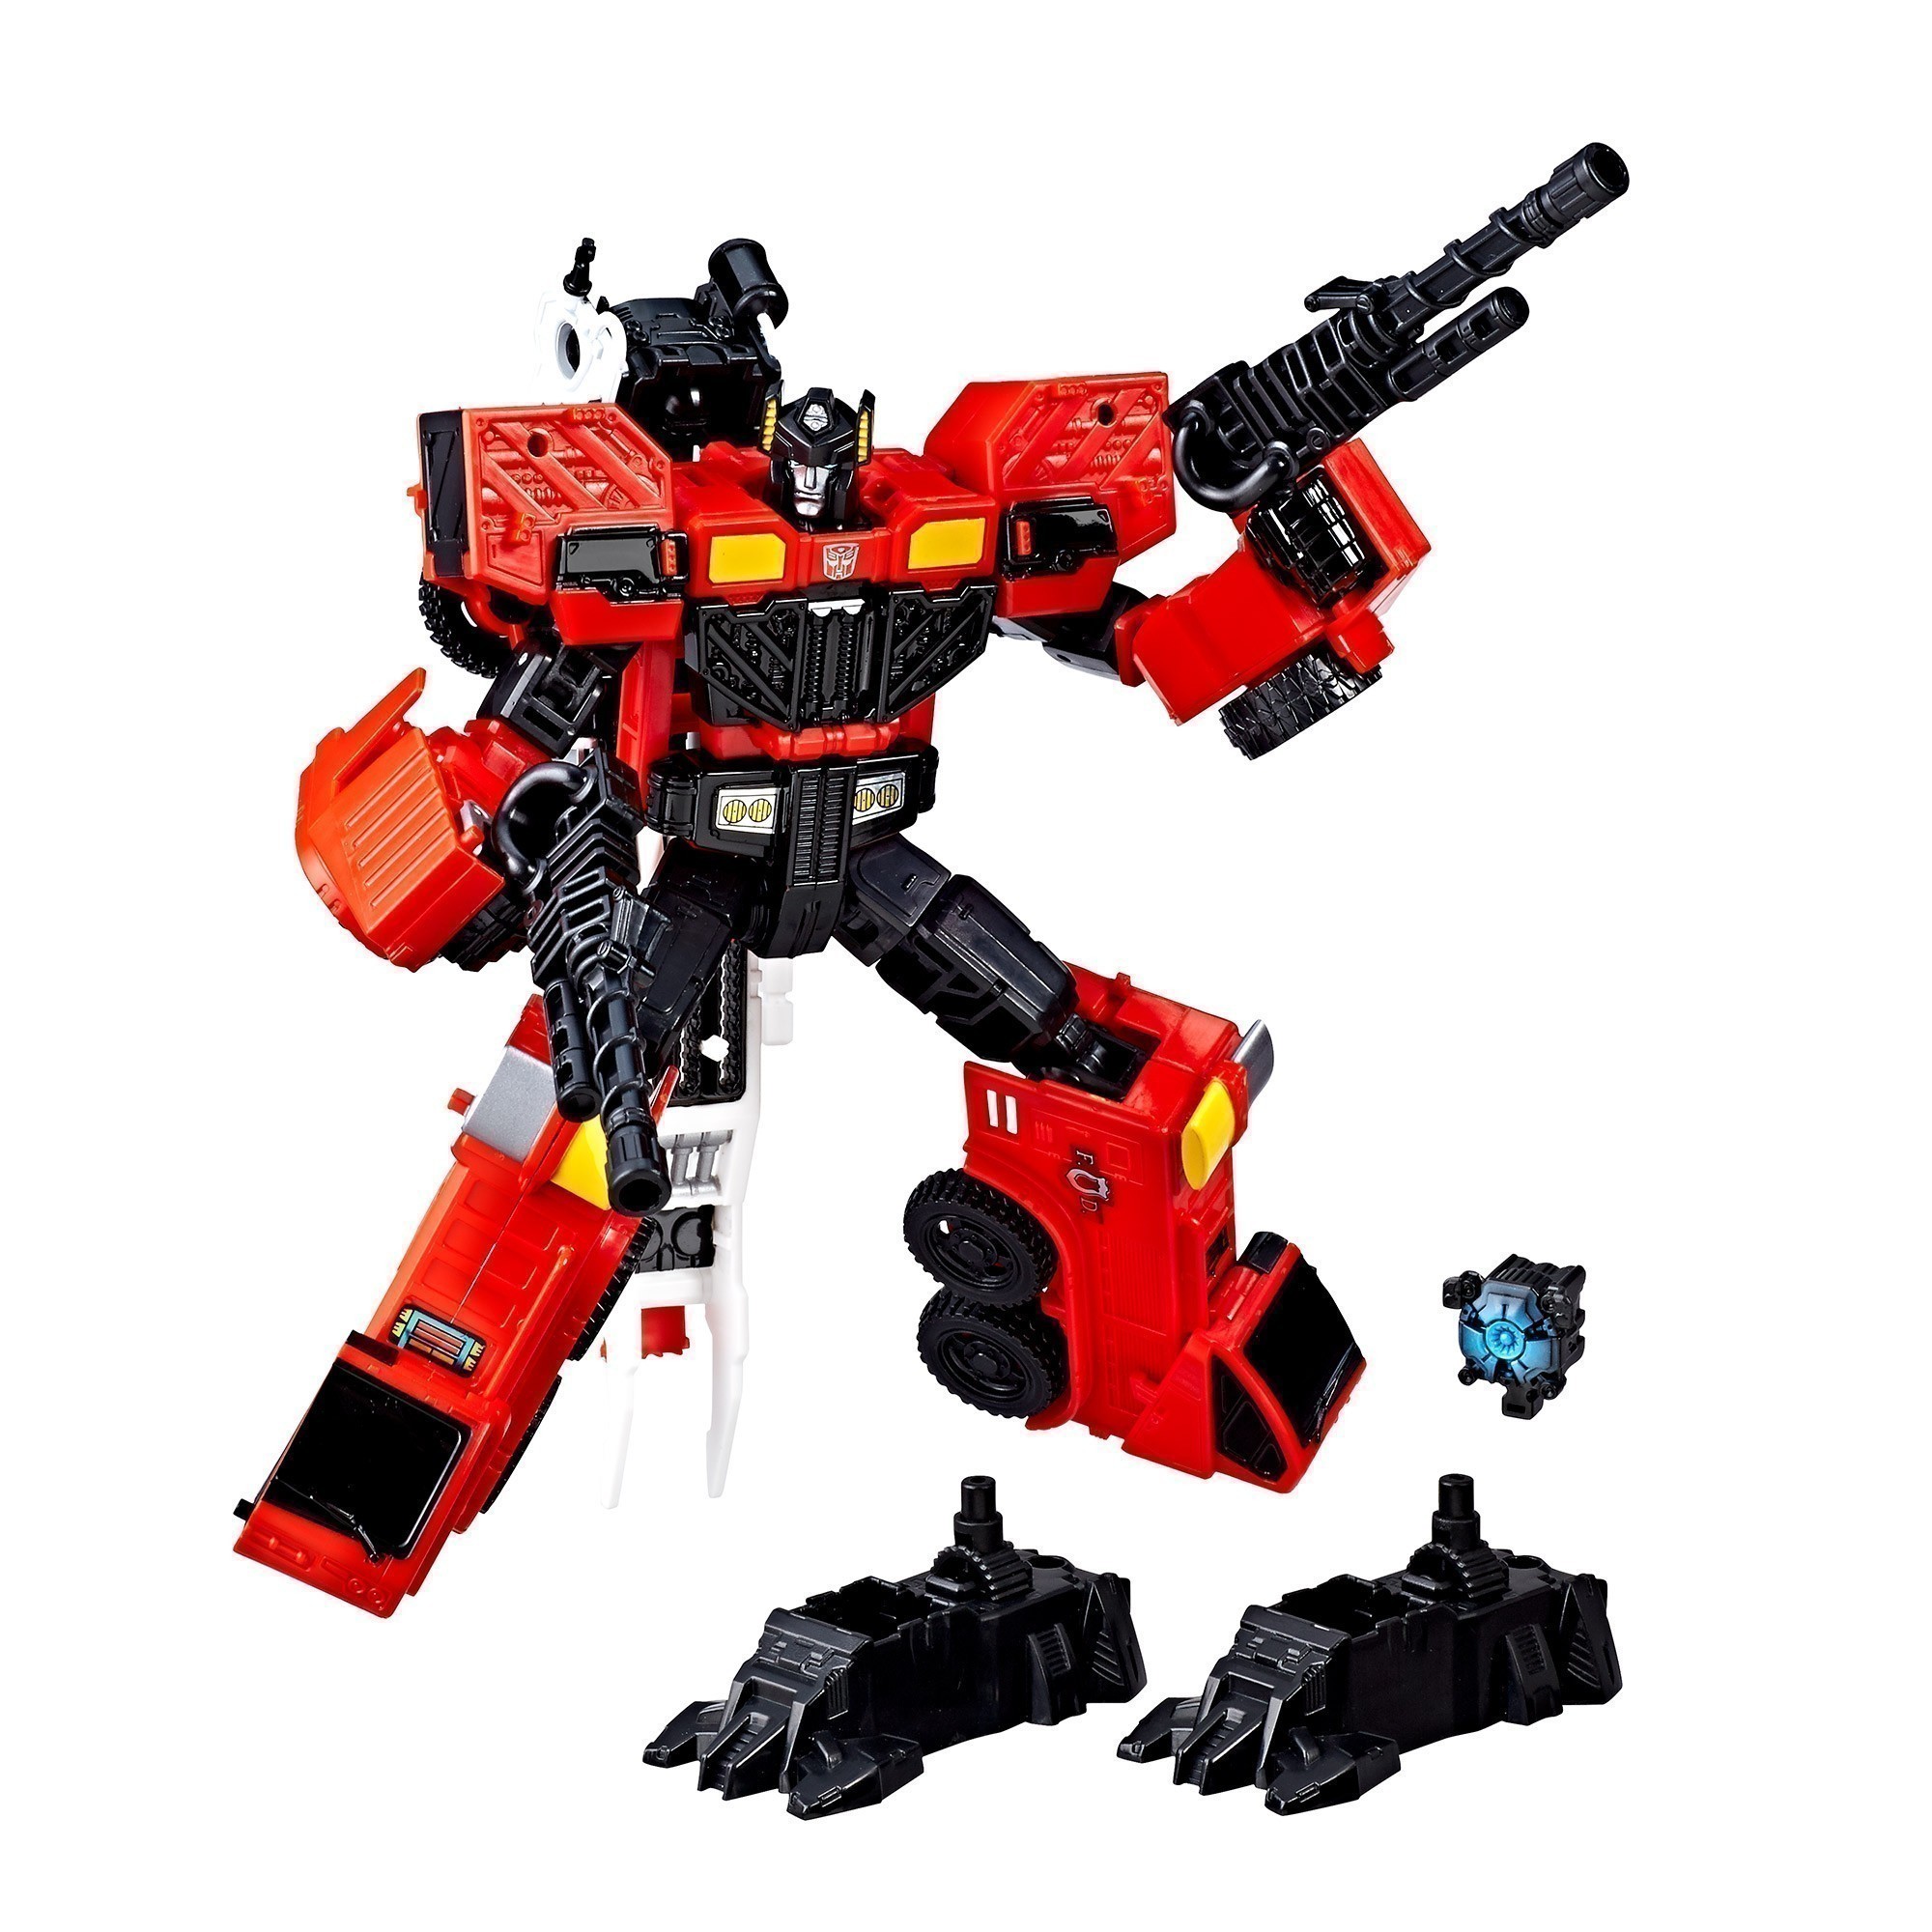 Transformers - Generations Power of the Primes - Voyager Class Inferno